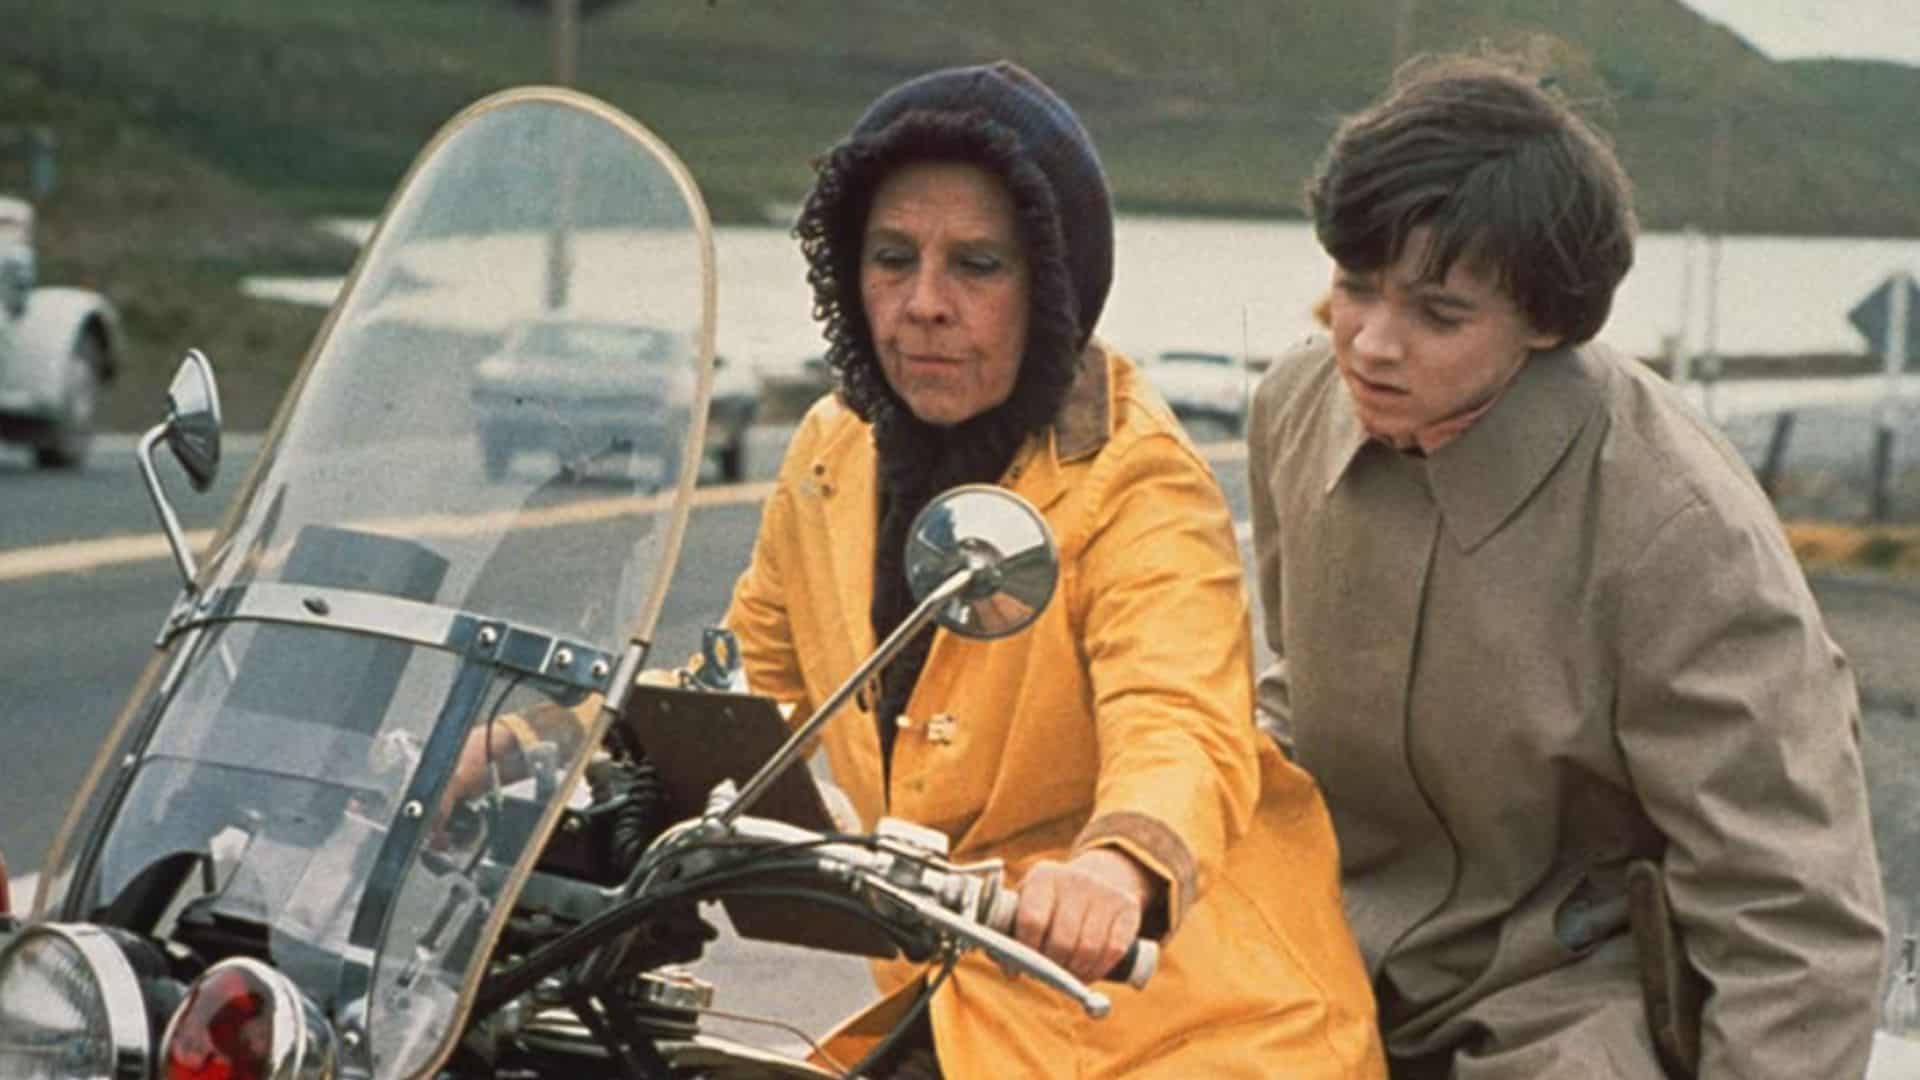 An older woman in a yellow coat and a young man in a brown coat sitting on a motorcycle in this image from Paramount Pictures